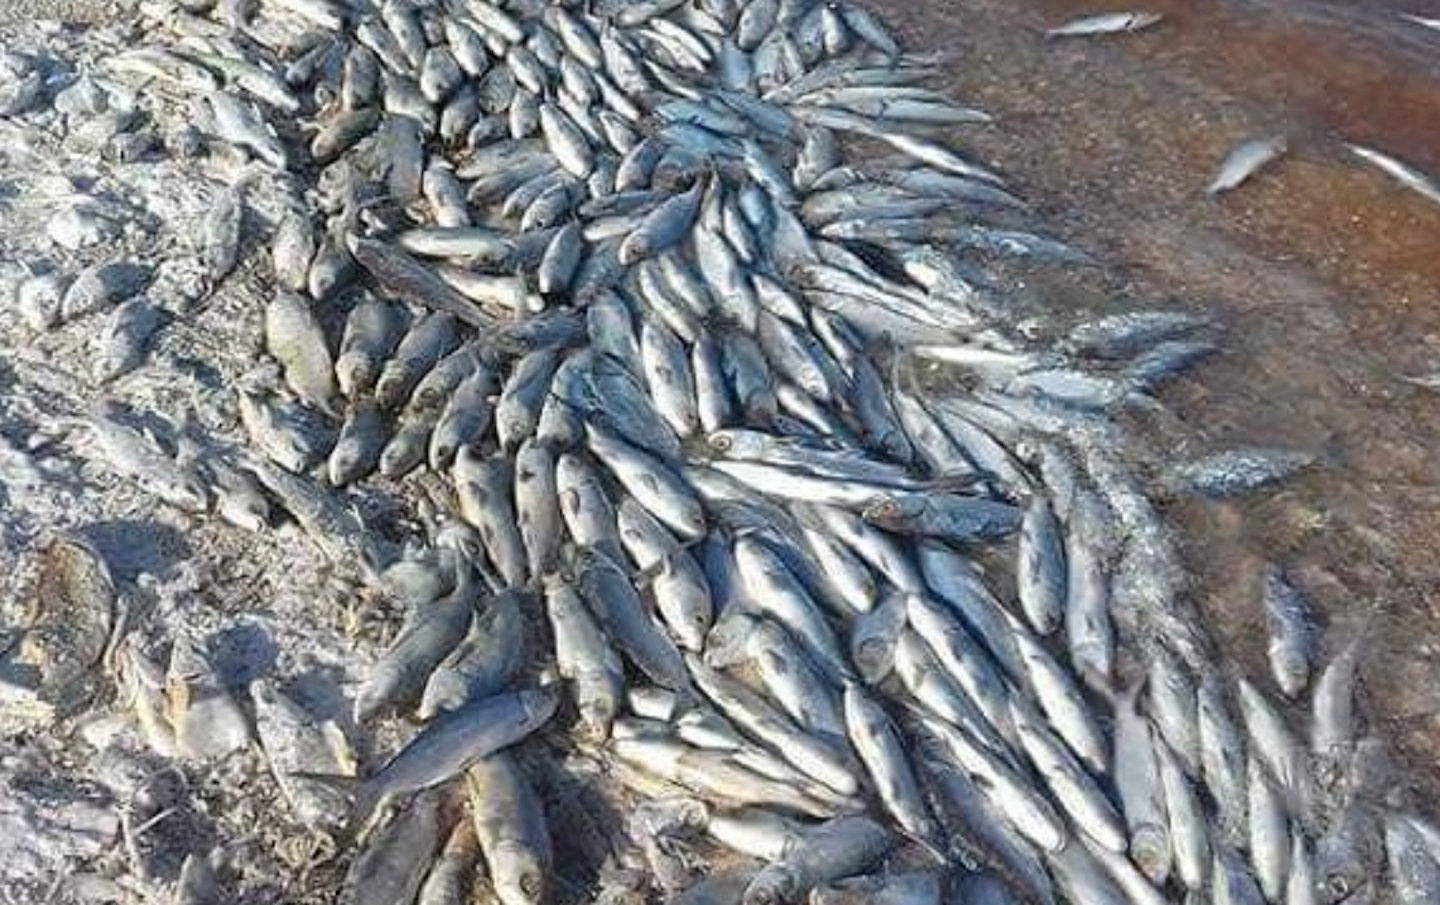 Lack of rain and extreme heat have caused some ponds to dry up or have increased the salinity of the water, killing hundreds of milkfish. Photo courtesy of RADIO KIRIBATI News/Humans of Kiribati